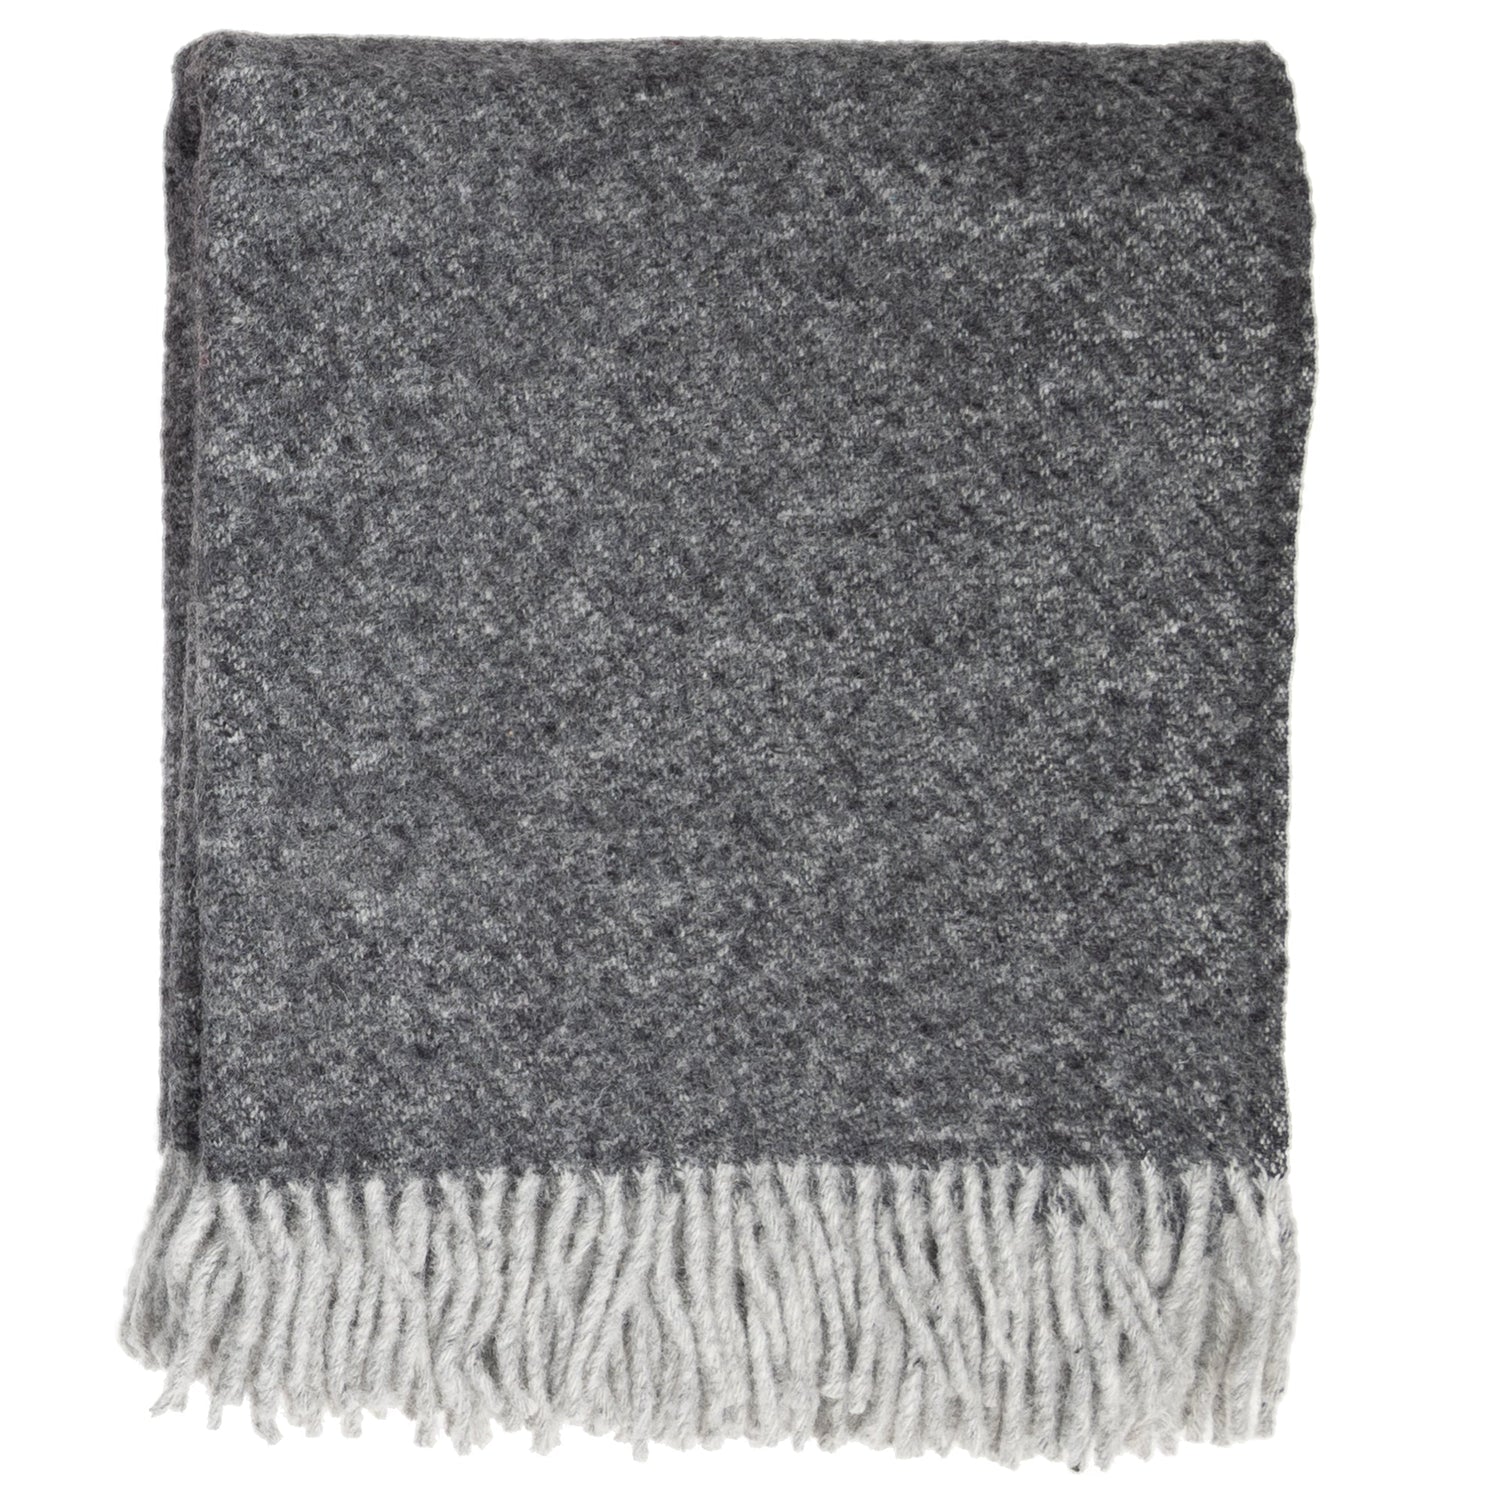 Southampton Home Wool Twill Throw Blanket (Charcoal)-Throws and Blankets-SHWoolTwillCharcoal-Prince of Scots